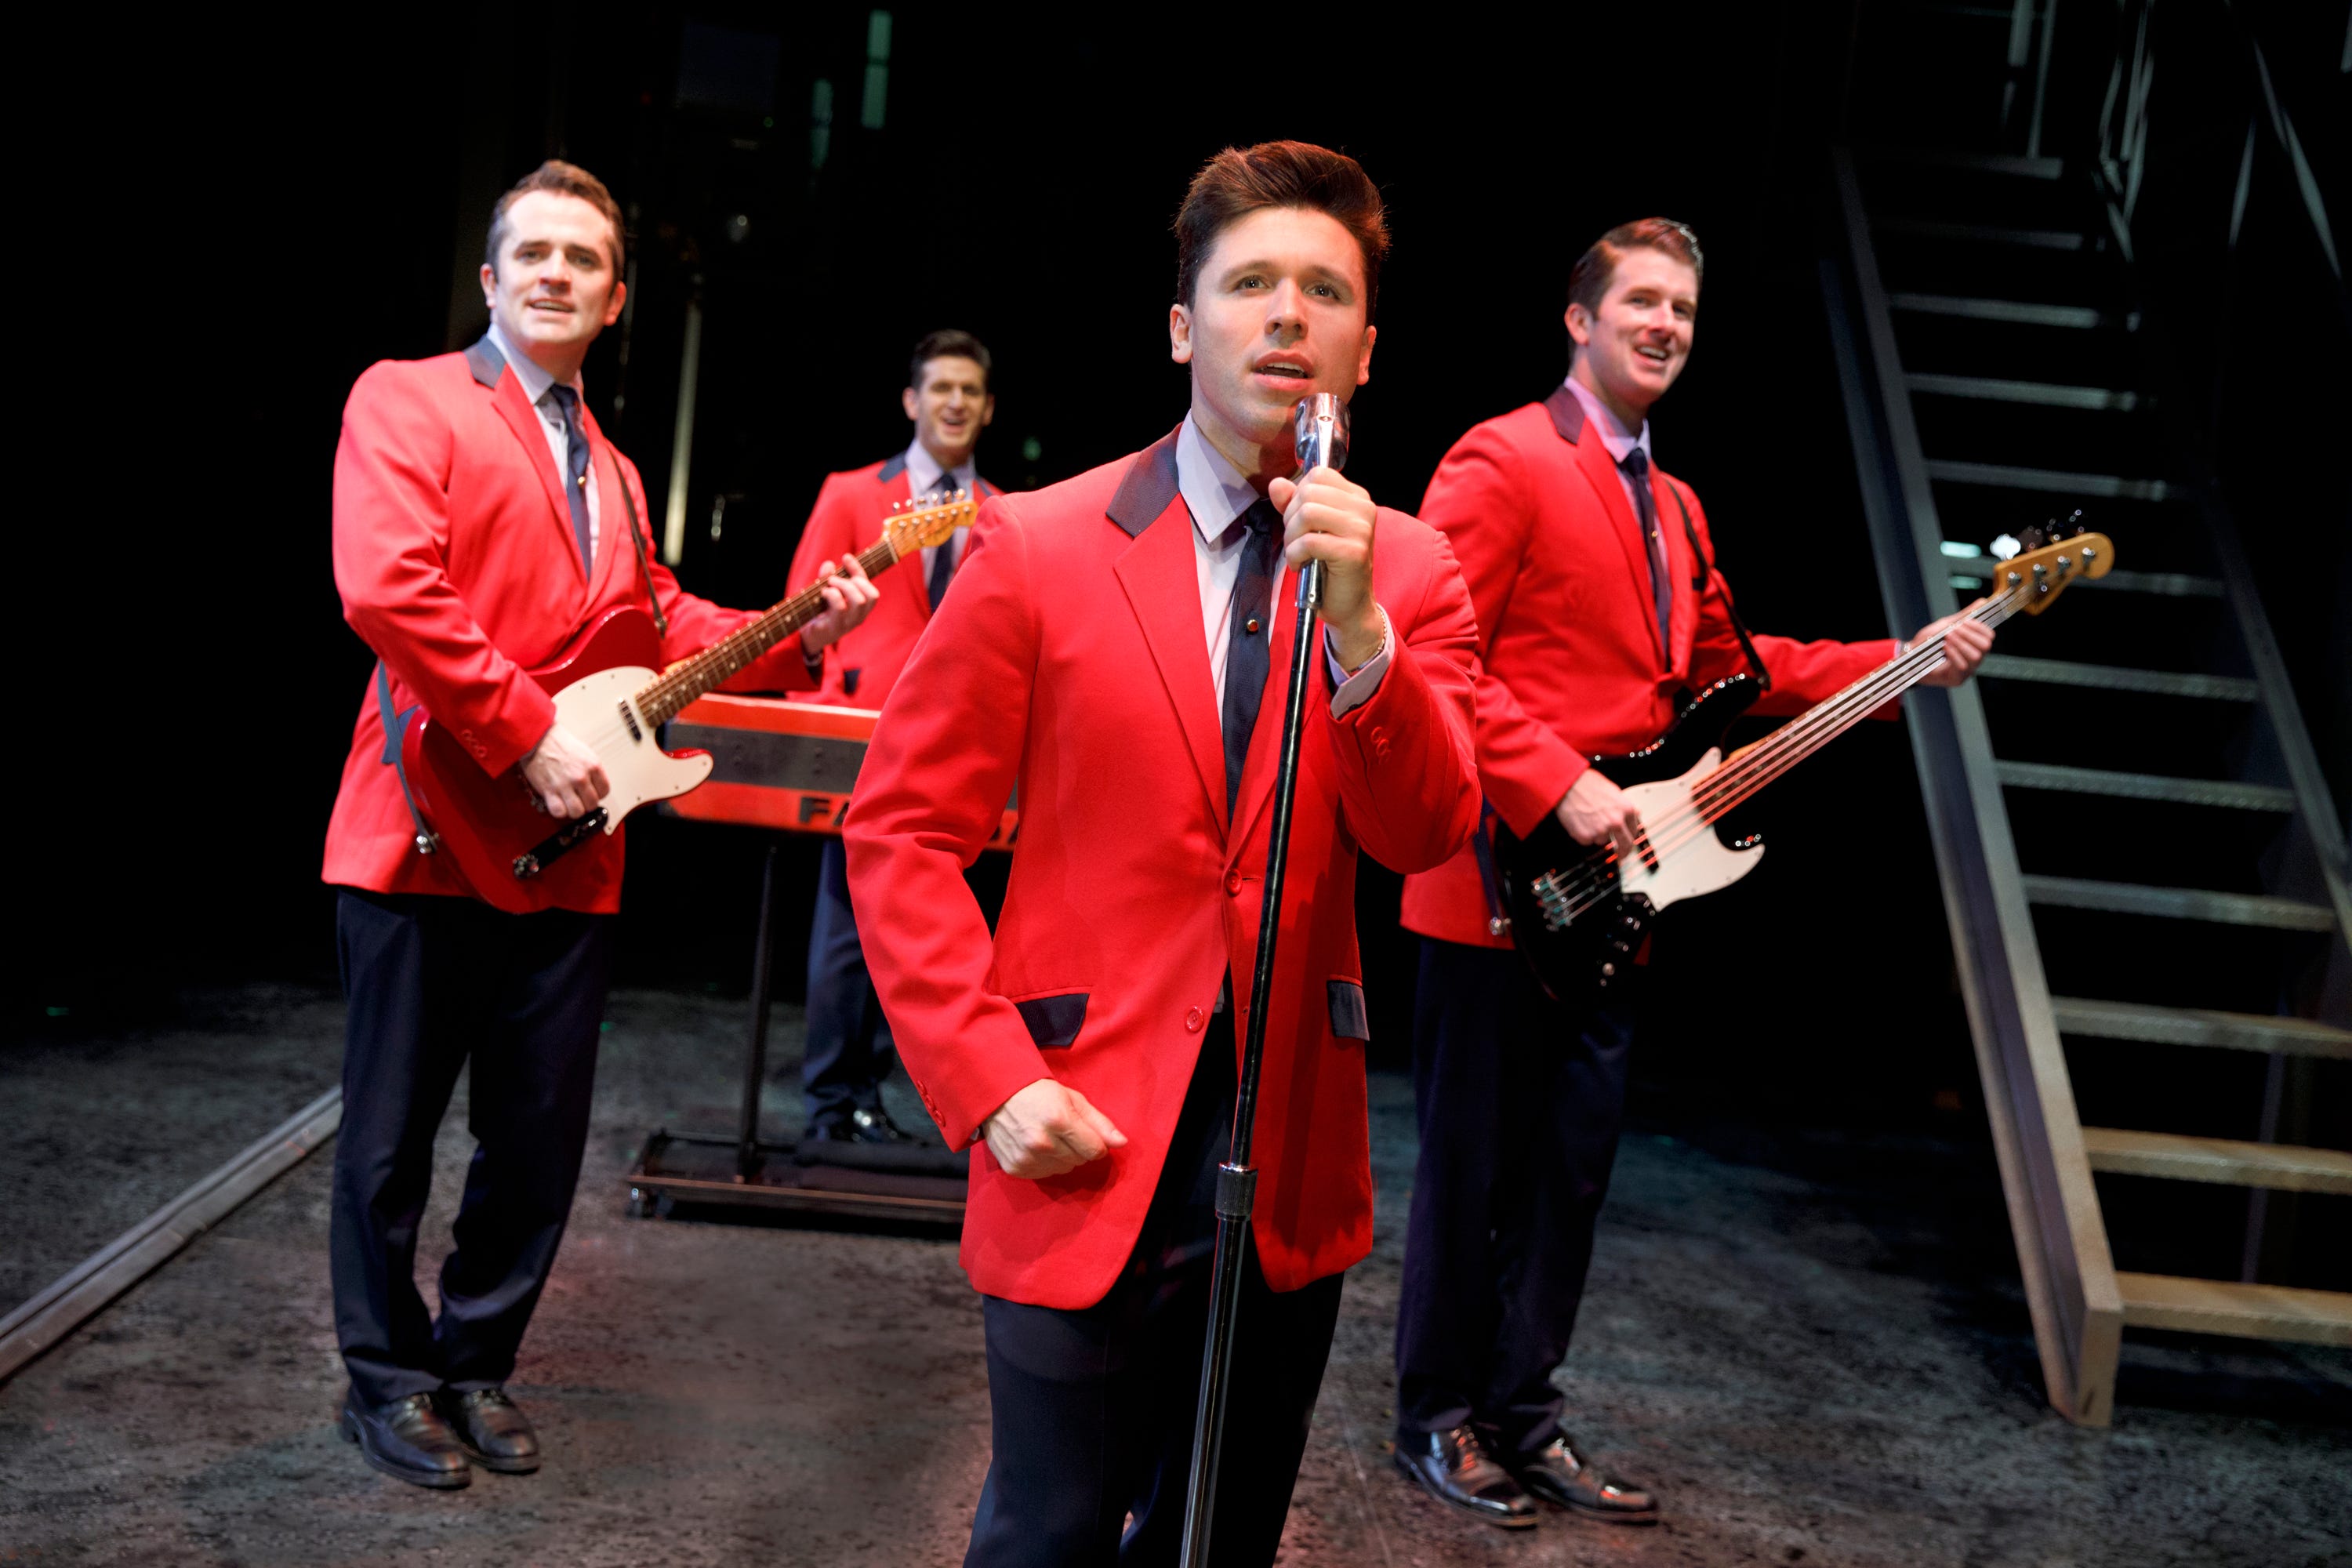 jersey boys shows